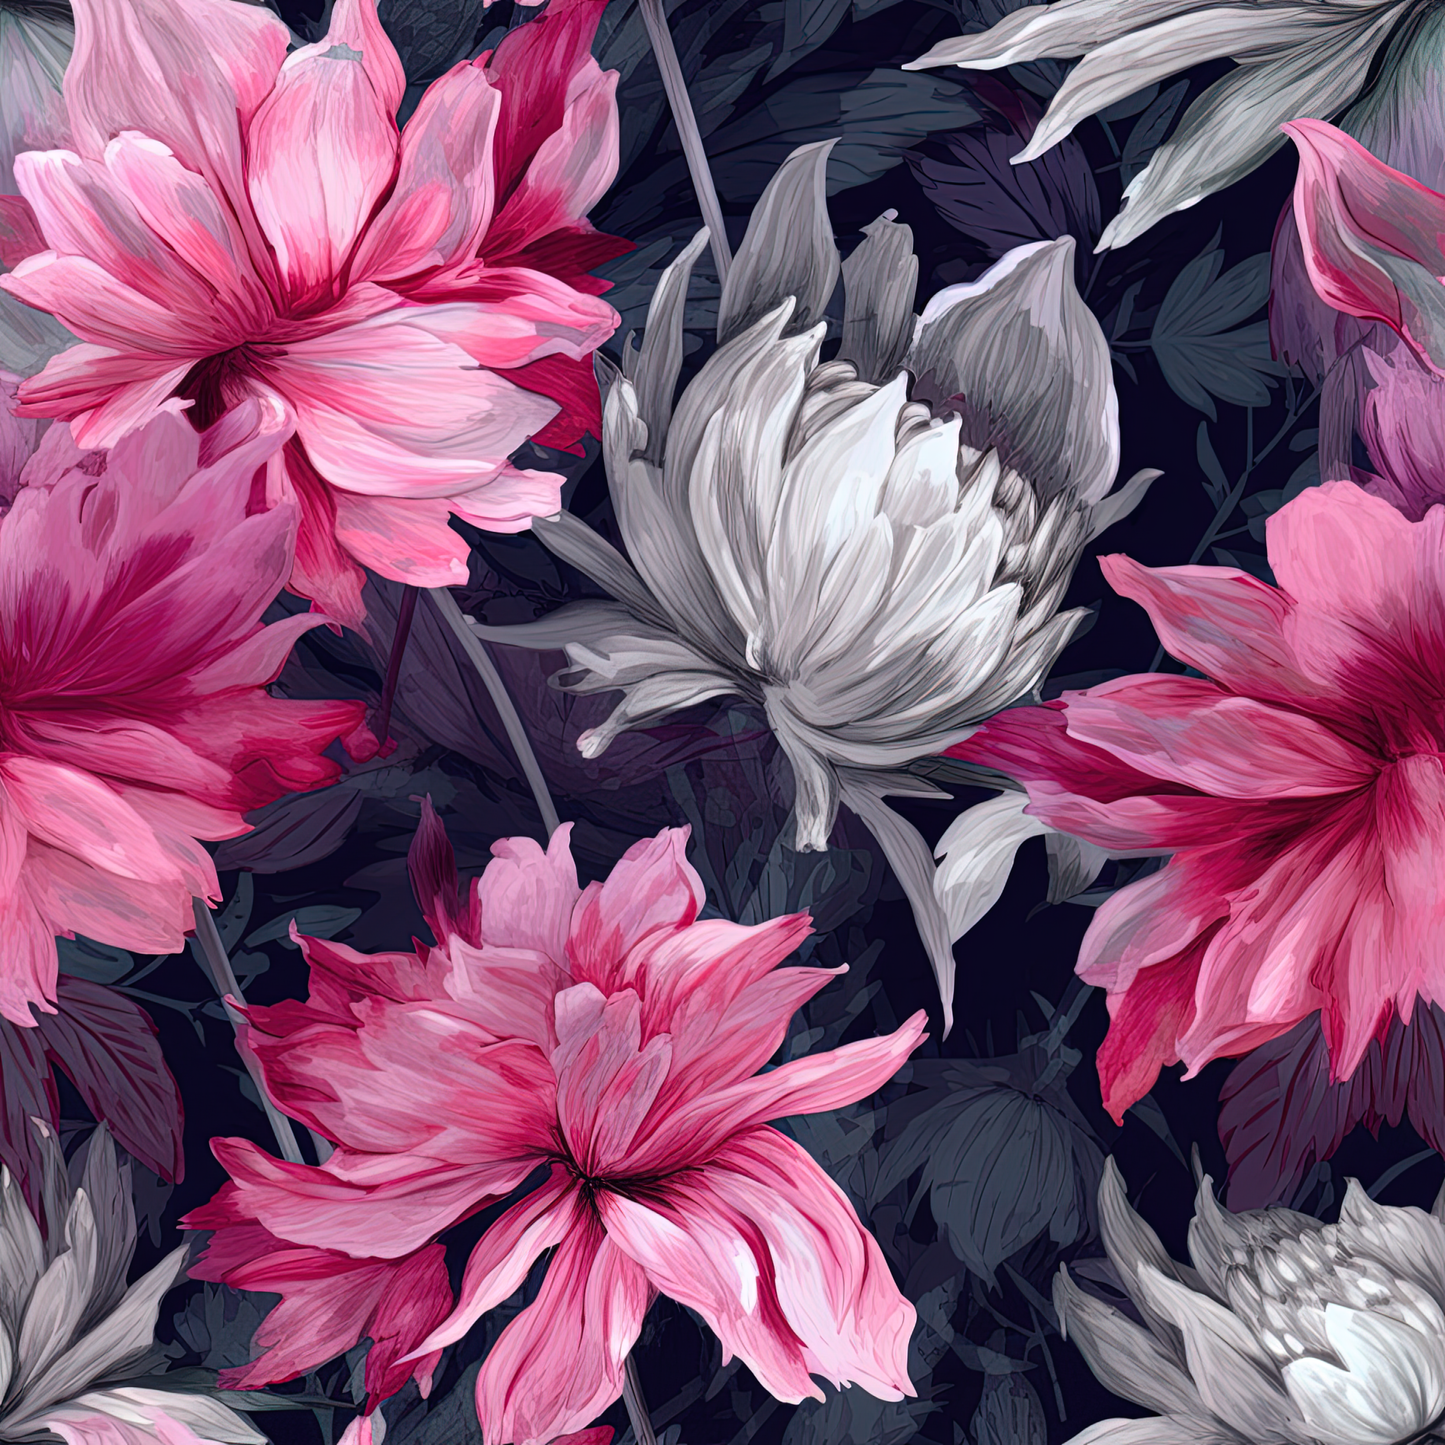 PINK AND BLACK FLORAL